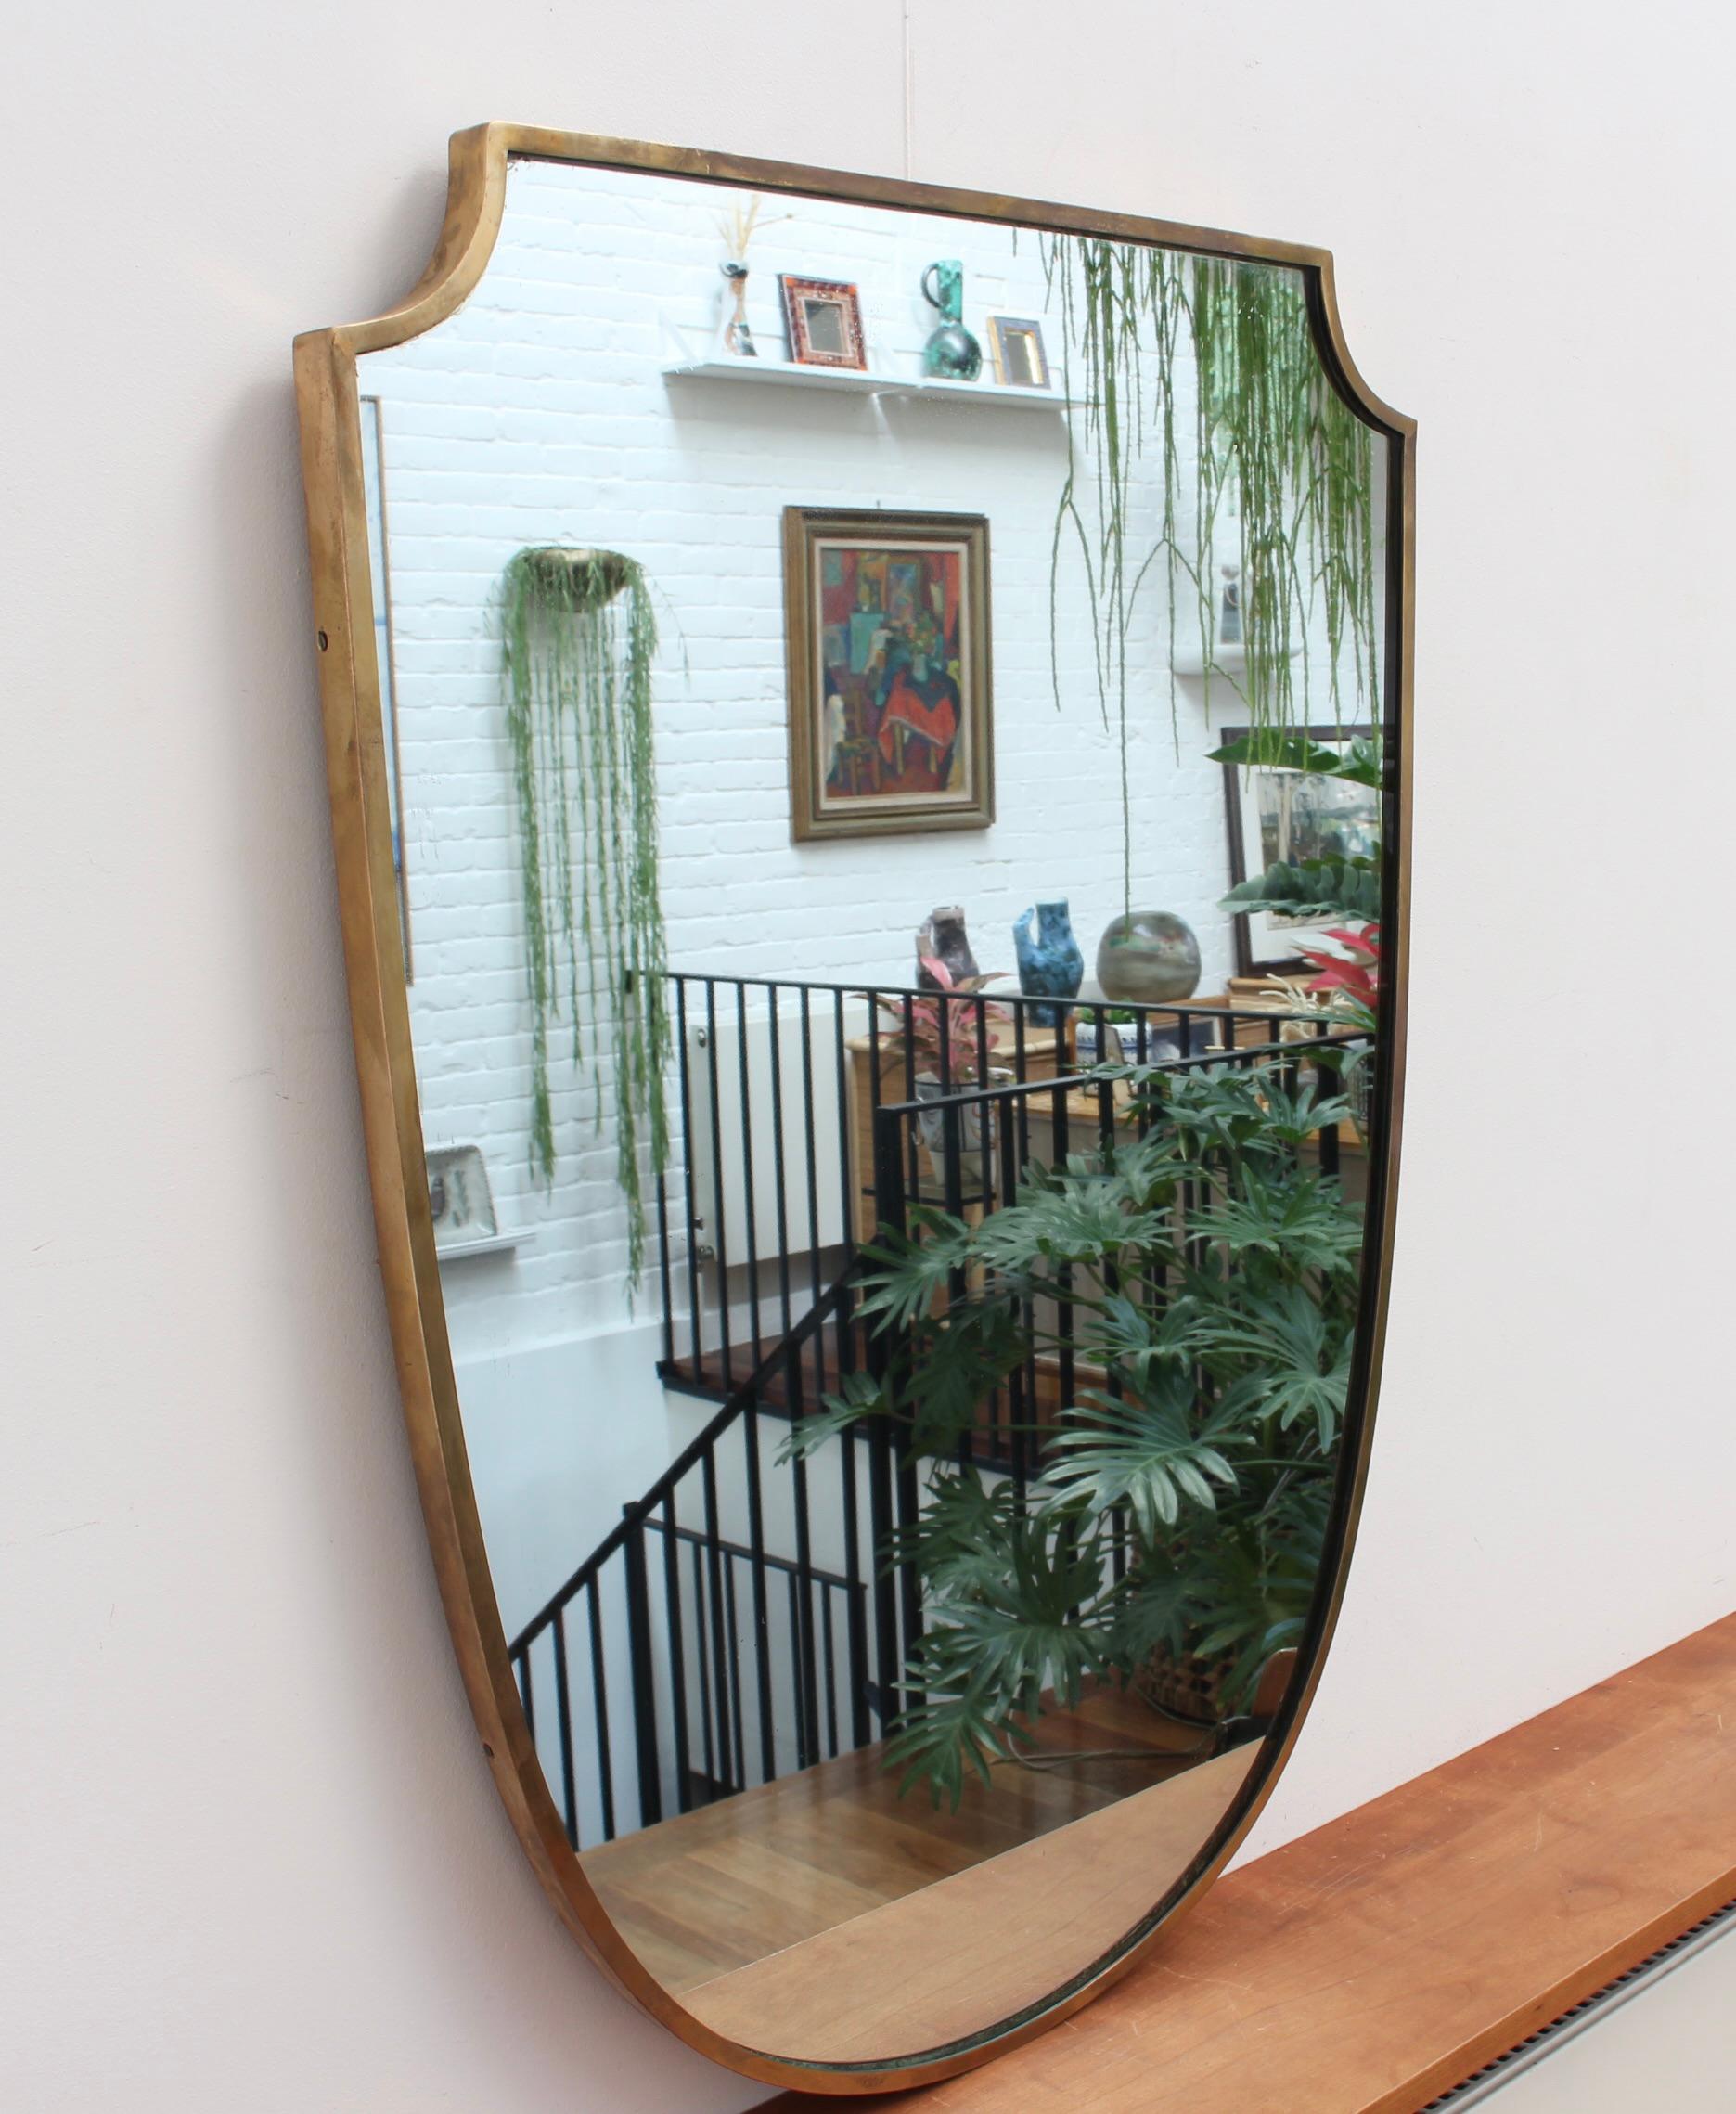 Midcentury Italian wall mirror with brass frame (circa 1950s). The mirror is classically-shaped and distinctive in a Gio Ponti style. The frame is in good overall condition with a characterful, age-related patina. The mirror glass is in fair